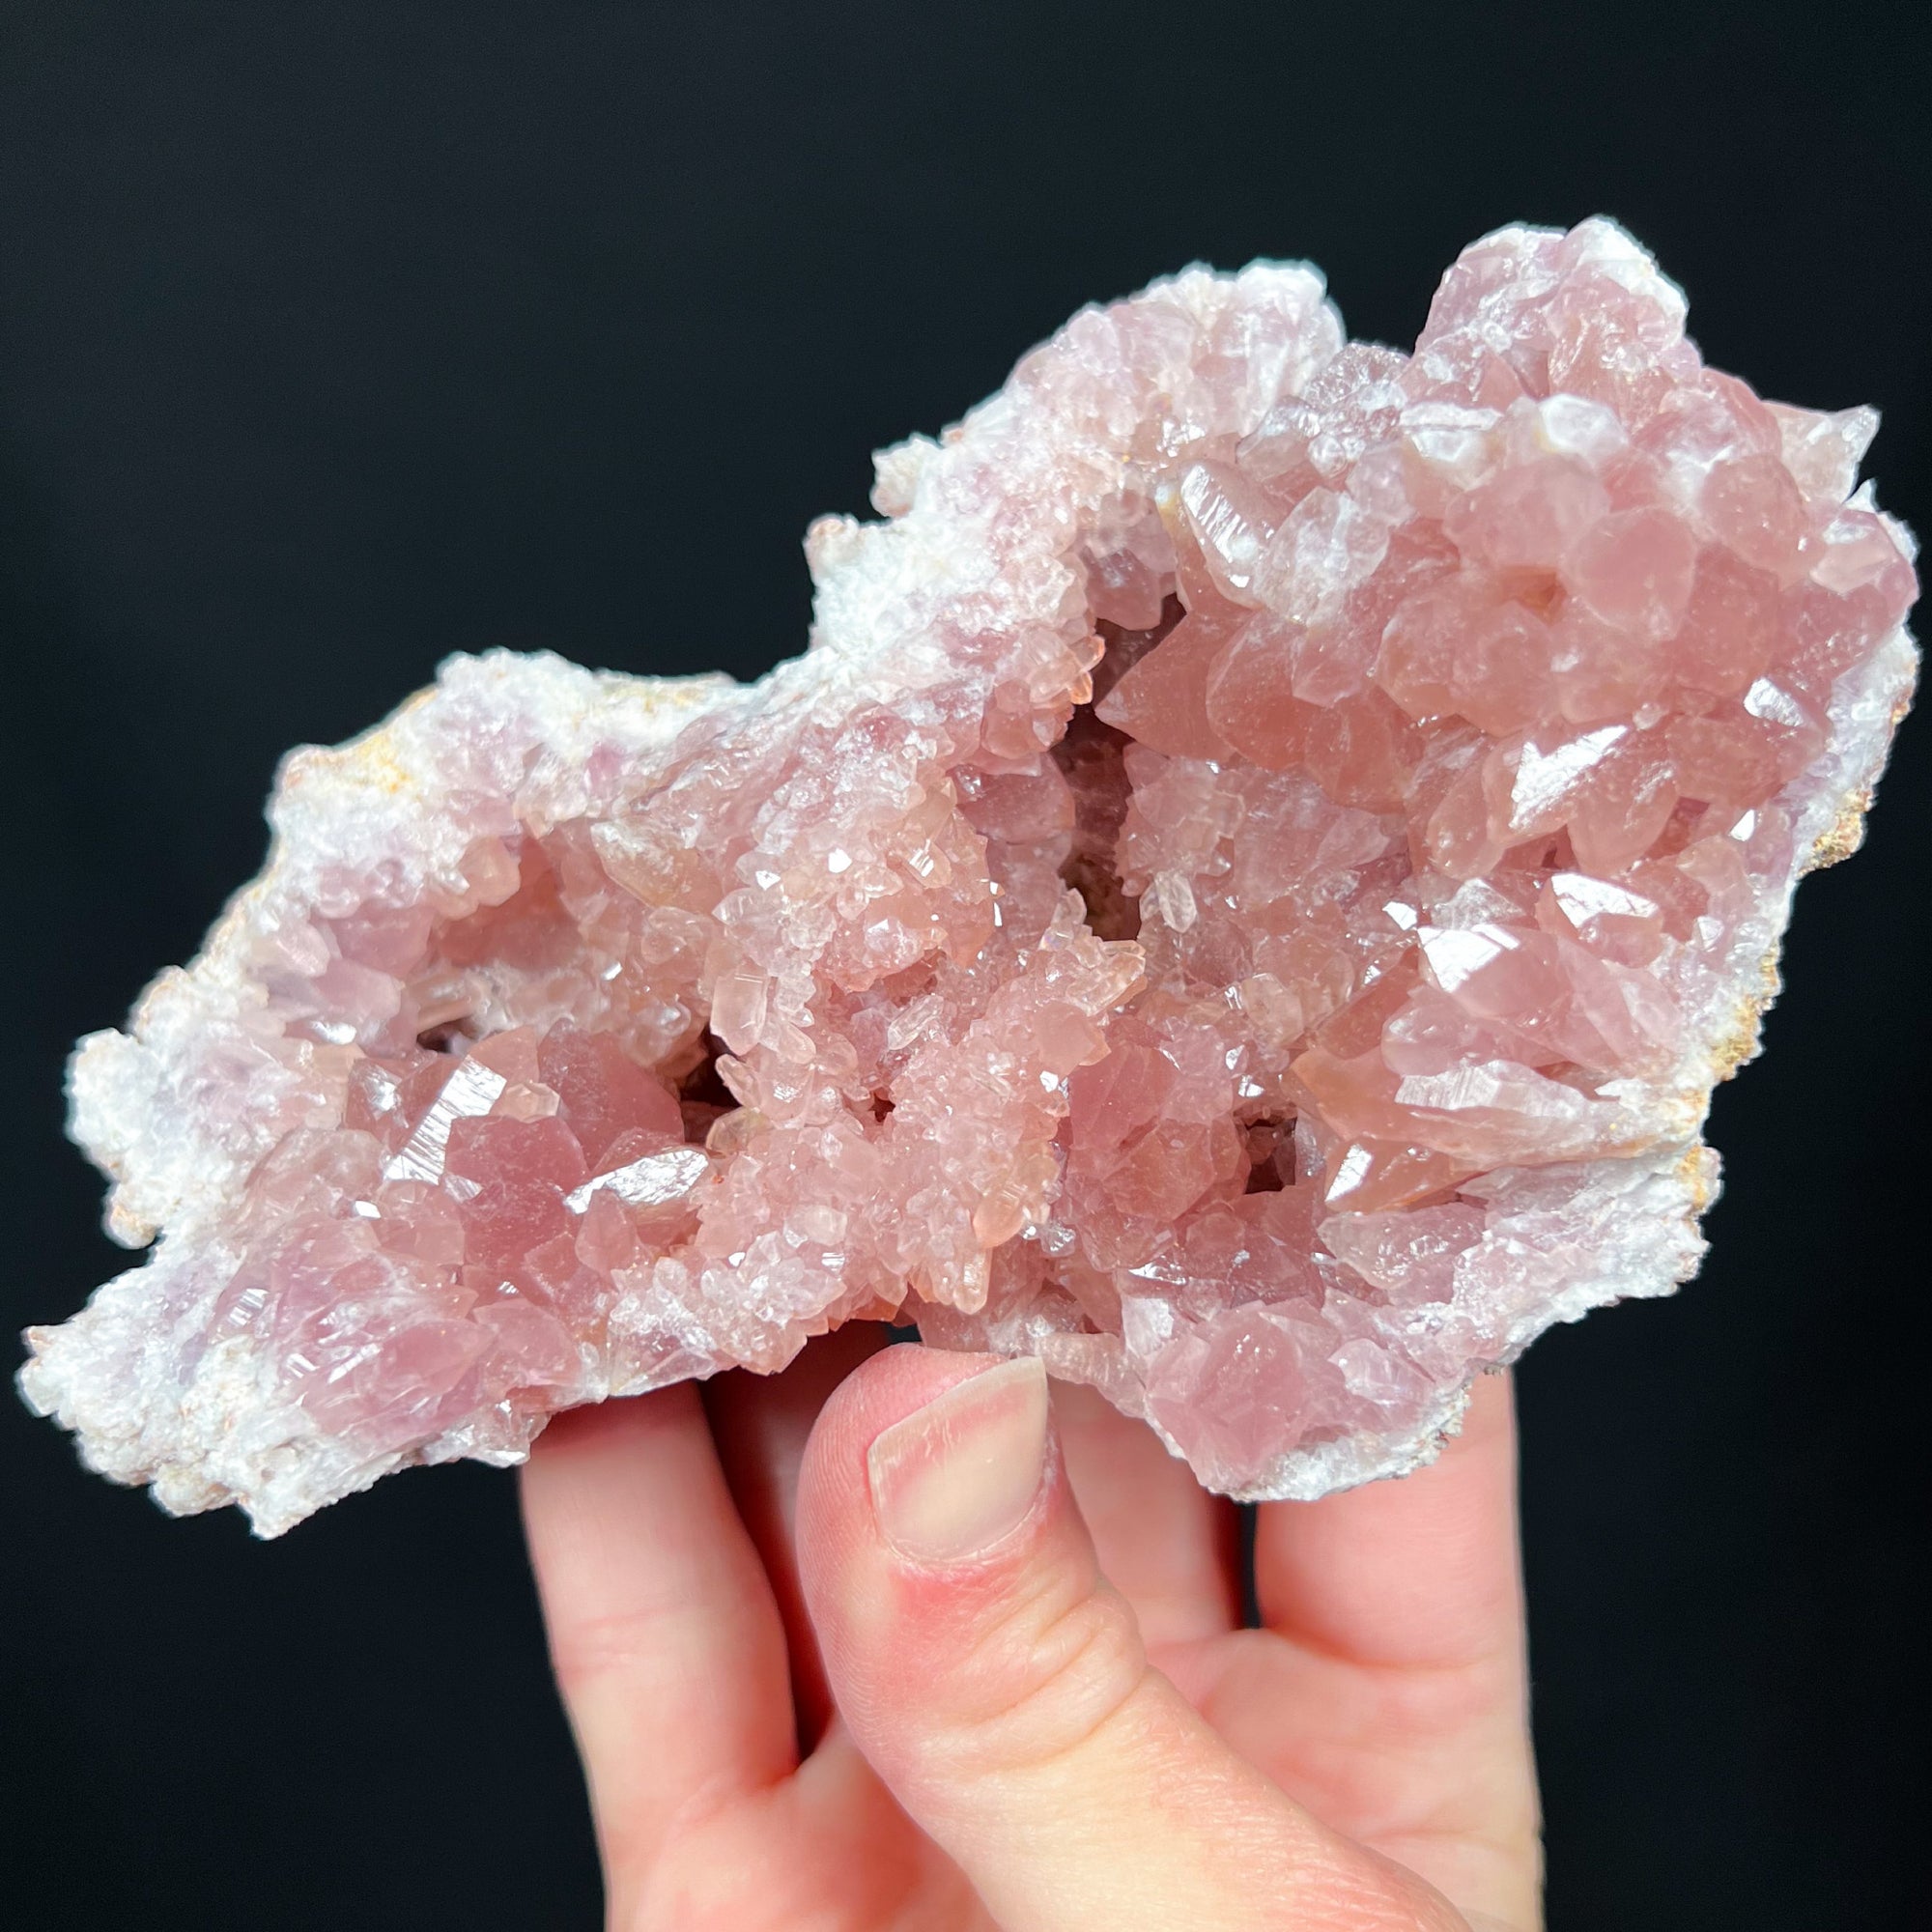 Large Pink Amethyst Geode from Argentina